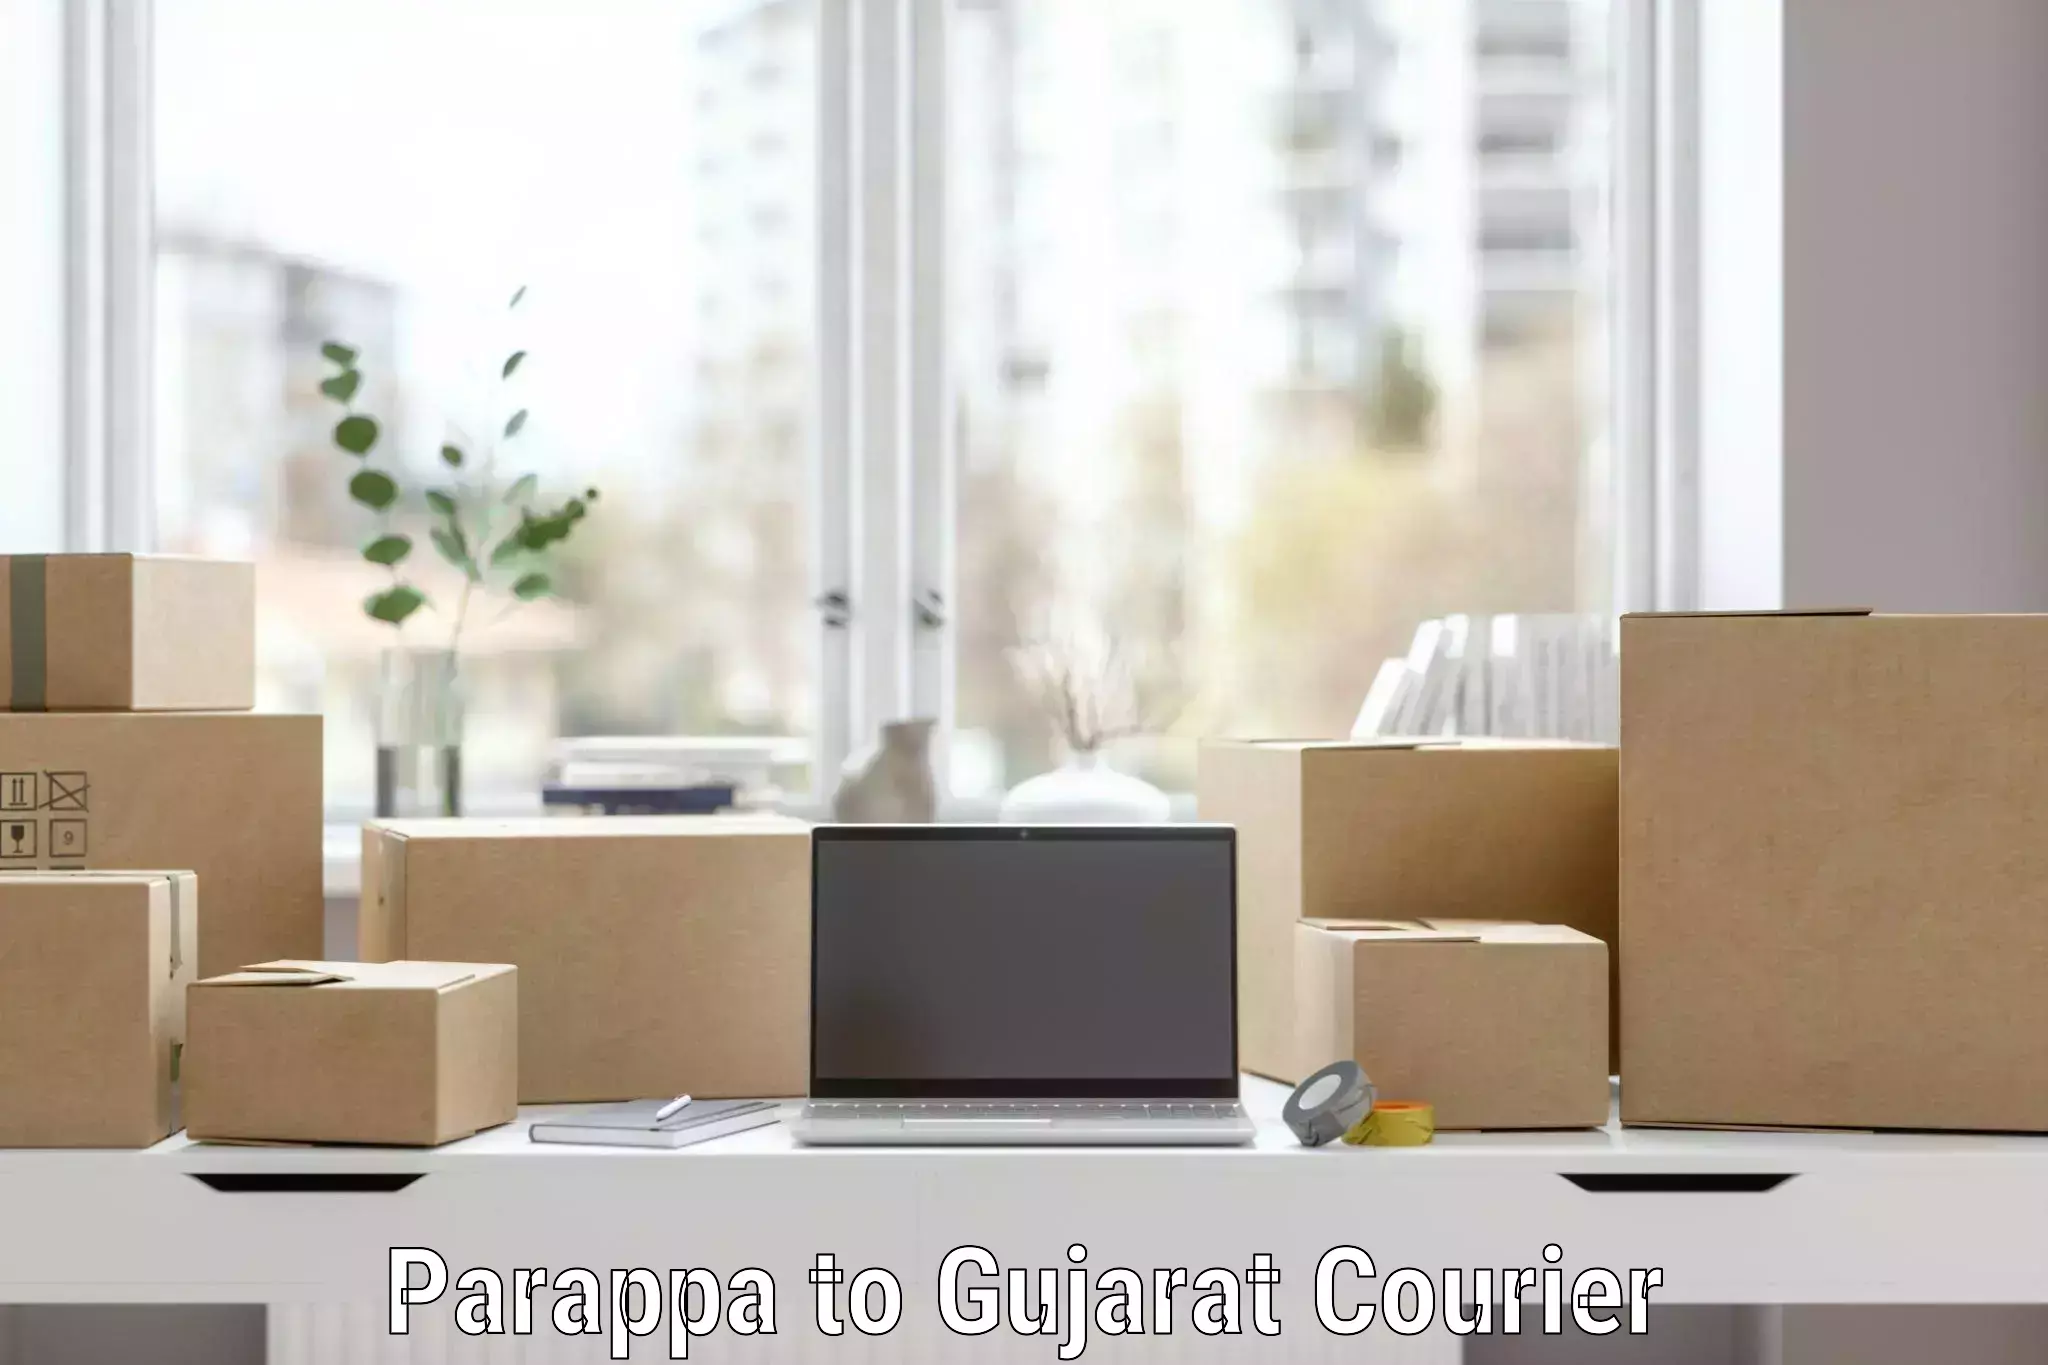 Full home relocation services Parappa to Ahmedabad